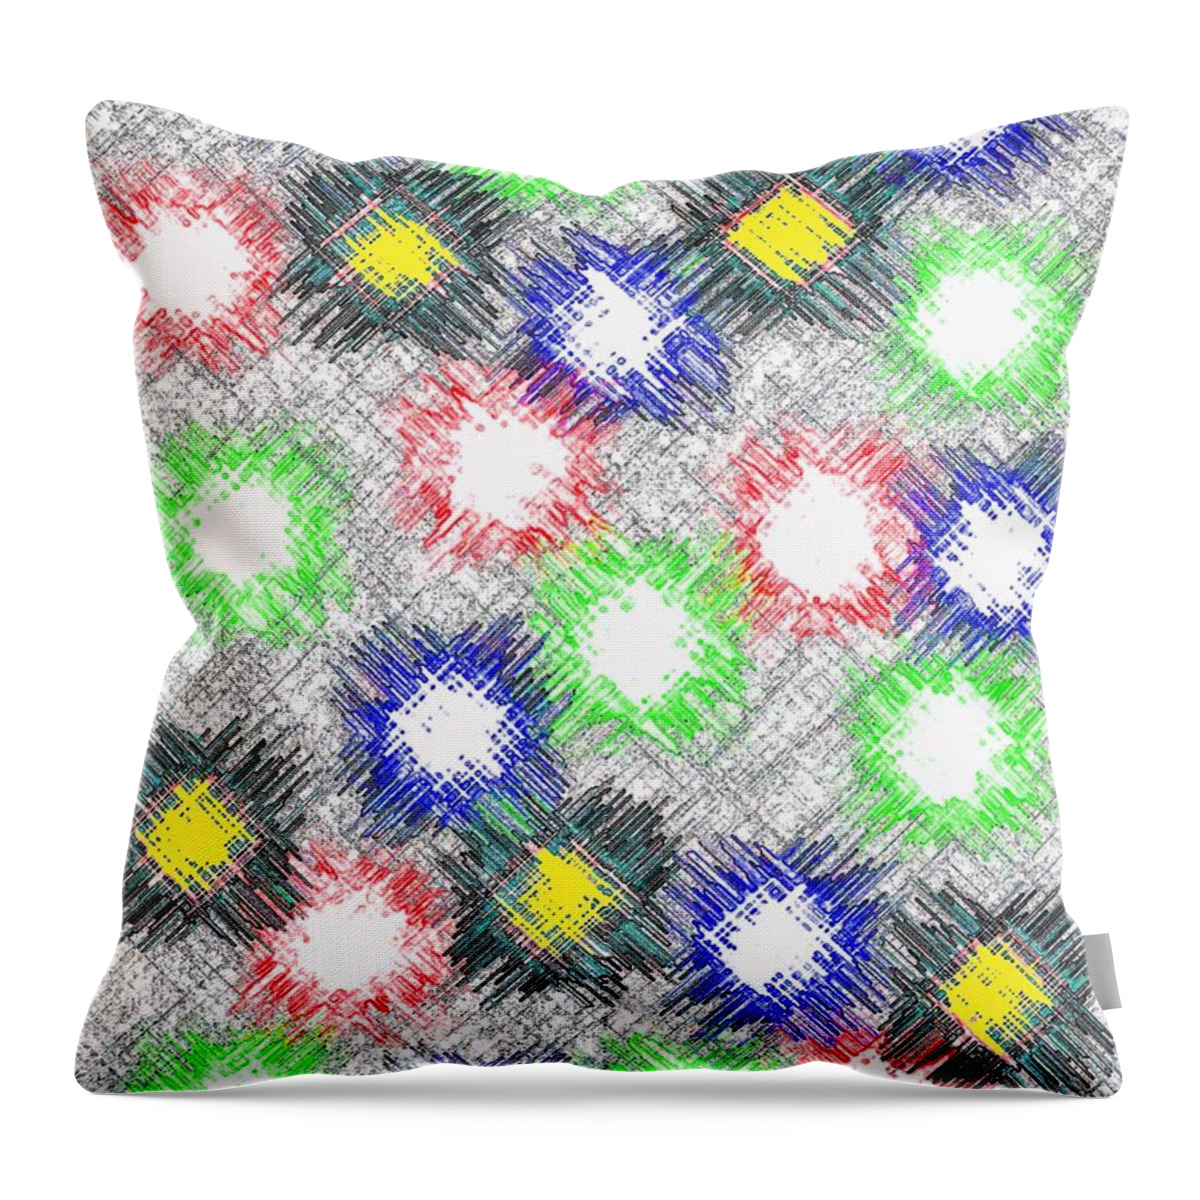 Abstract Throw Pillow featuring the digital art Harmony 32 by Will Borden